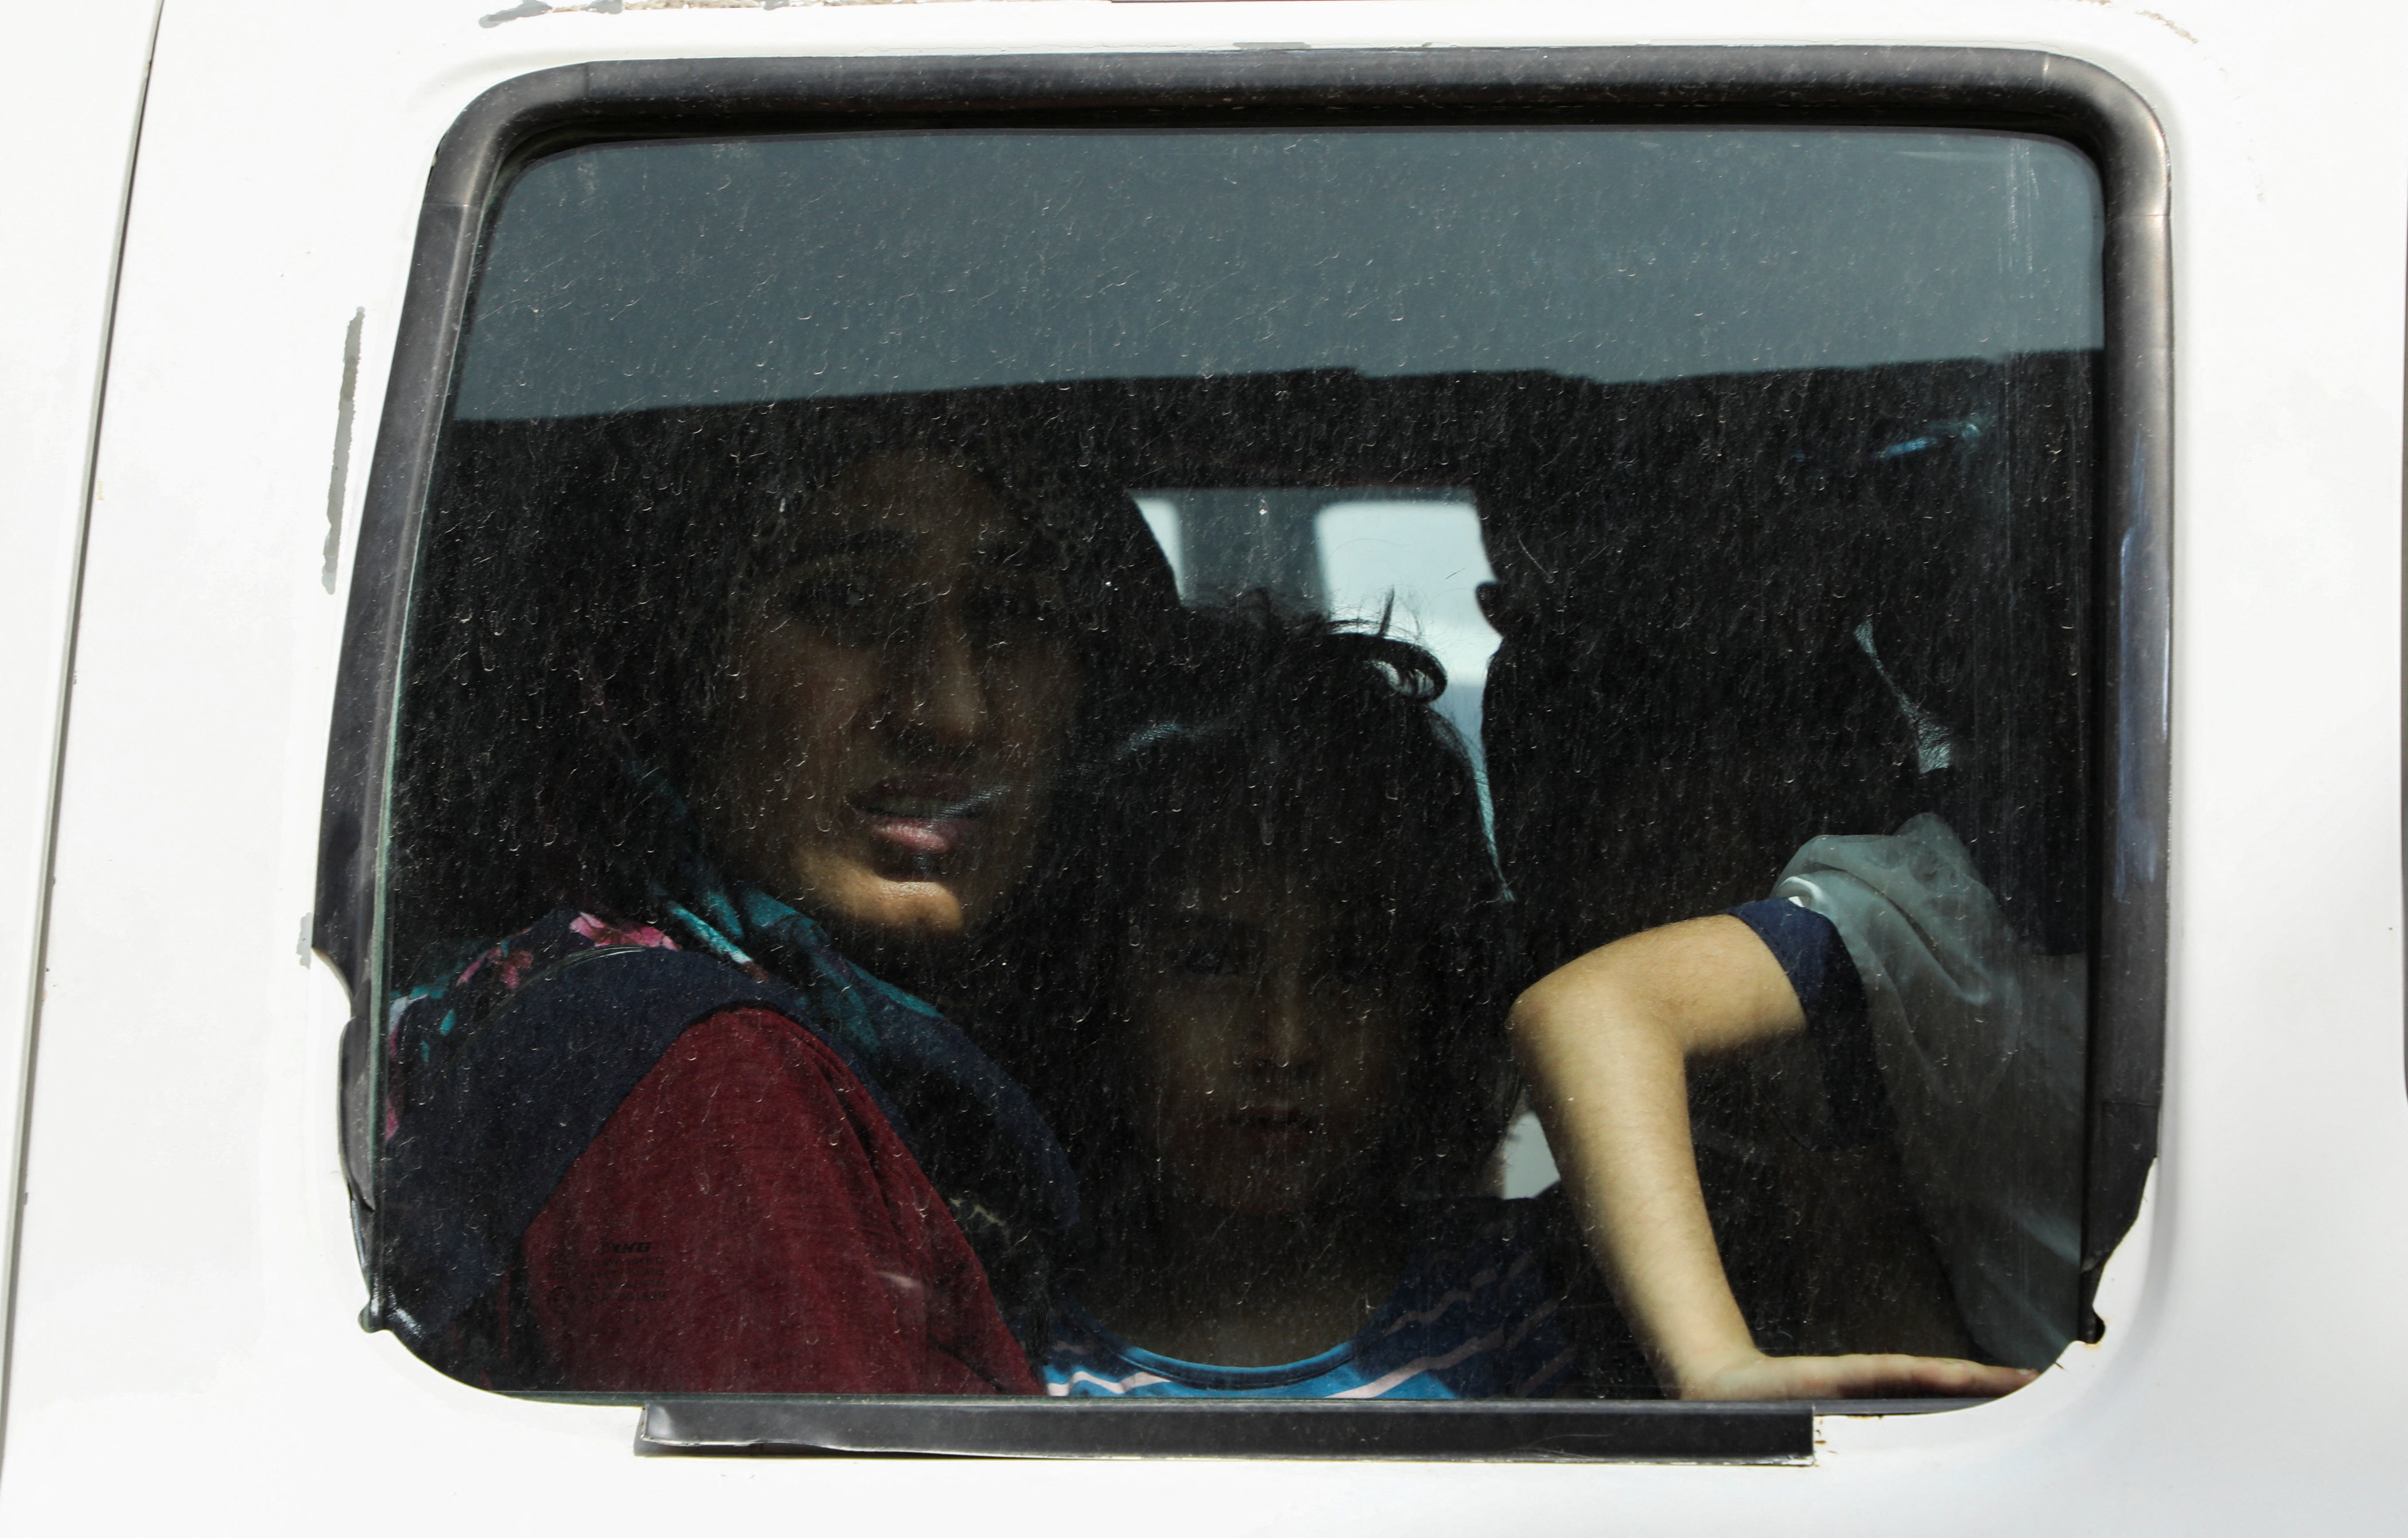 yrian kurds, who were evacuated from Sudan, arrive in Kurdish-controlled city of Qamishli, in northern Syria